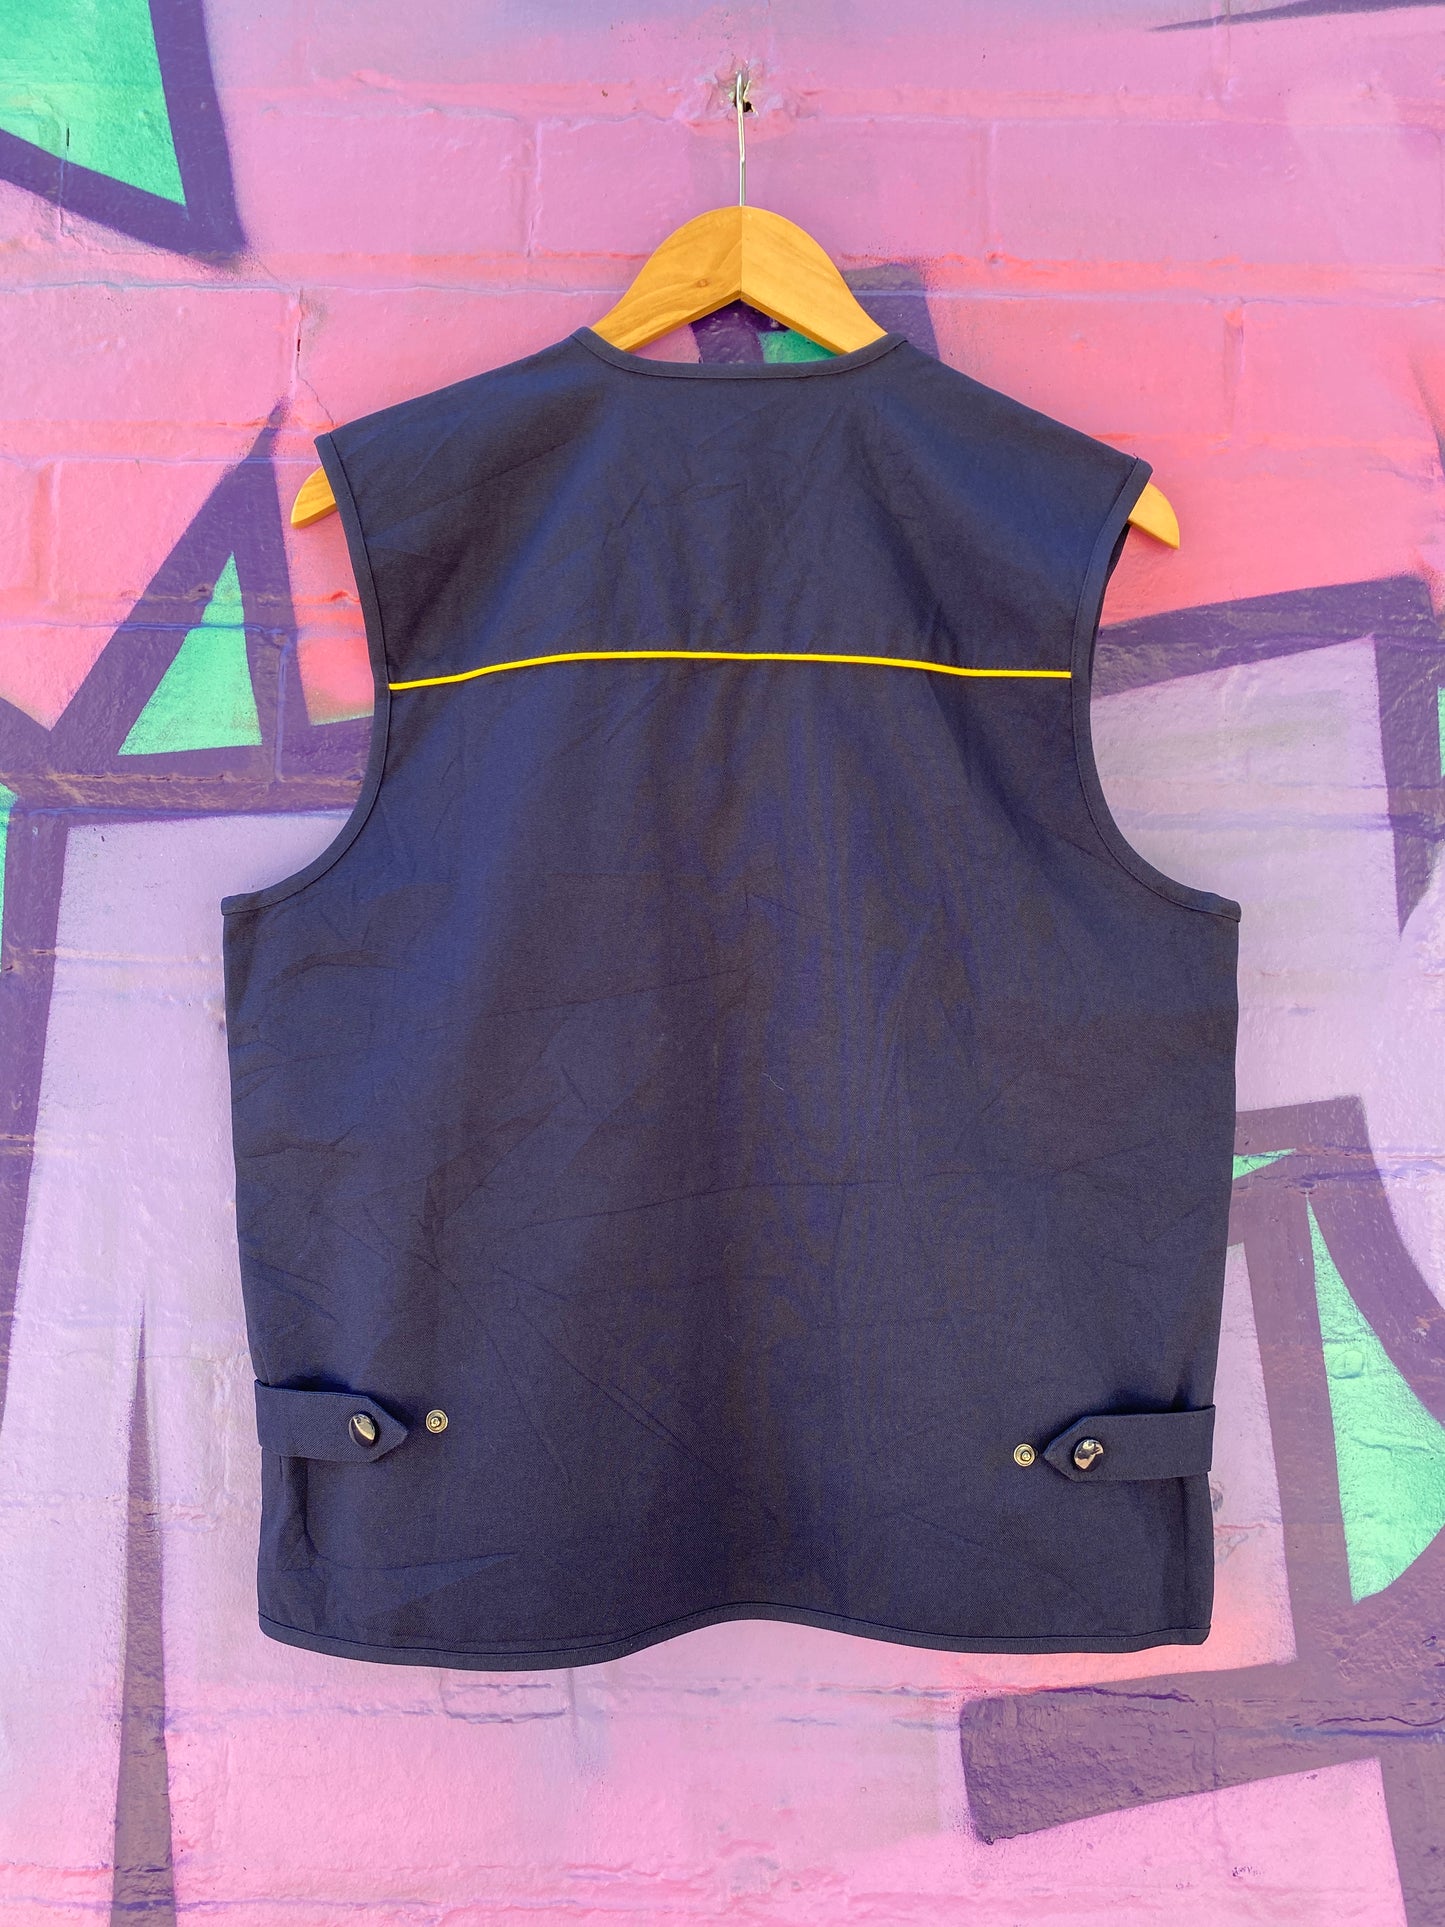 L - Armor-lux Navy/Yellow Accents Work Vest